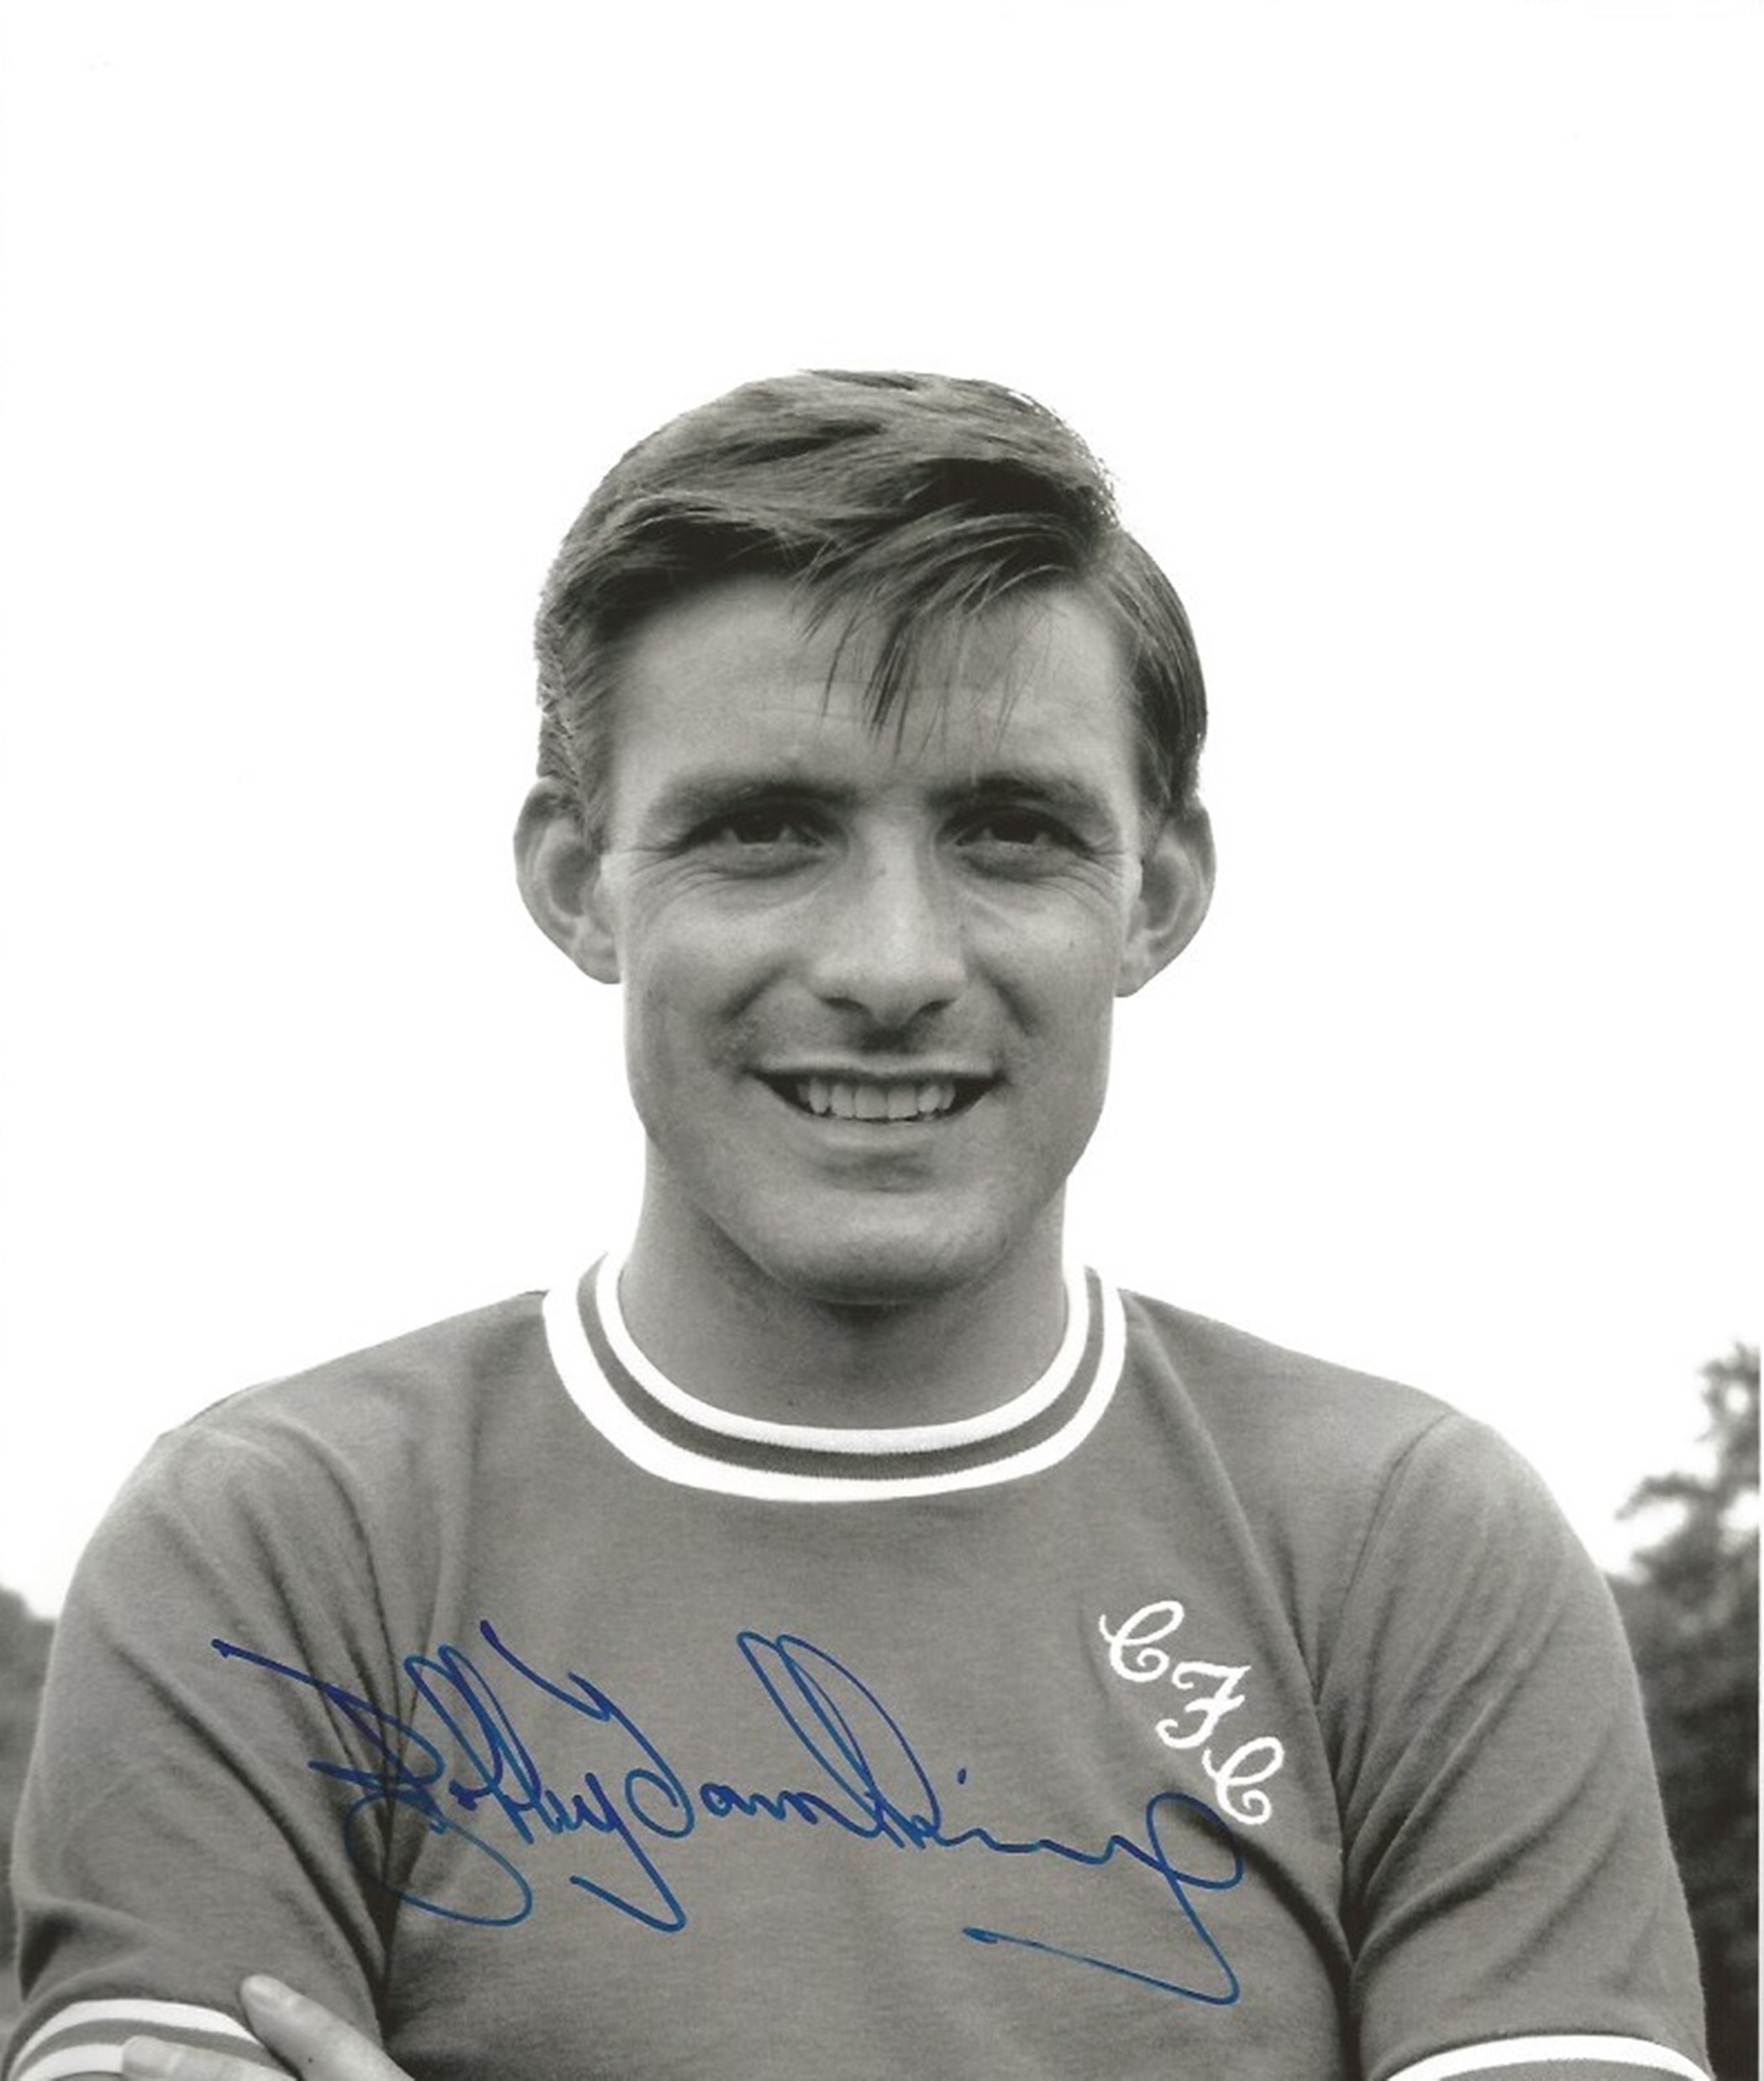 Bobby Tambling Chelsea Signed 12 x 8 inch football photo. Good condition. All autographs come with a